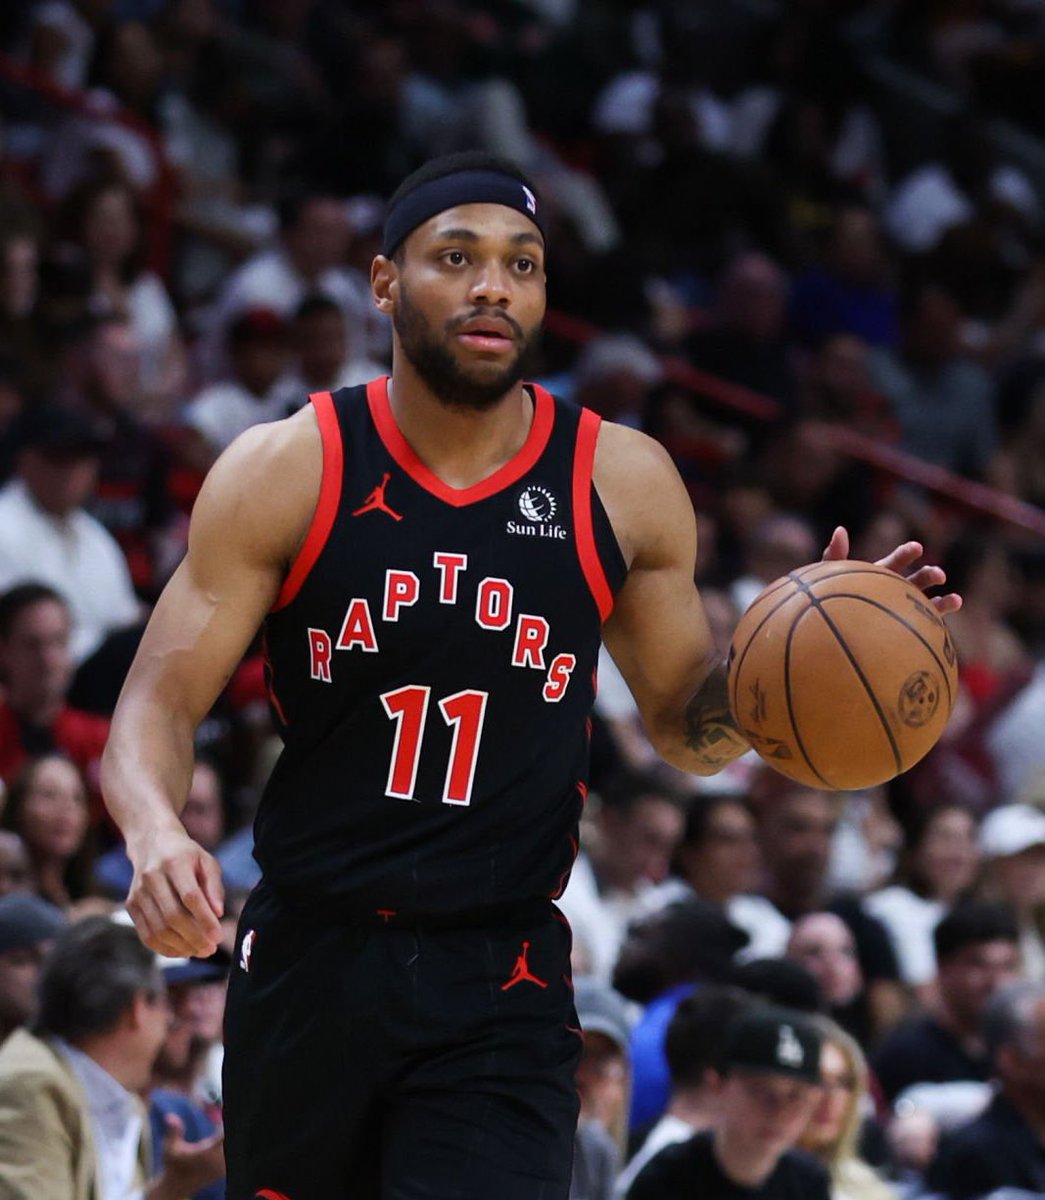 The Toronto Raptors are expected to trade Bruce Brown by next month, per @SmithRaps (Via bit.ly/3wE532u)